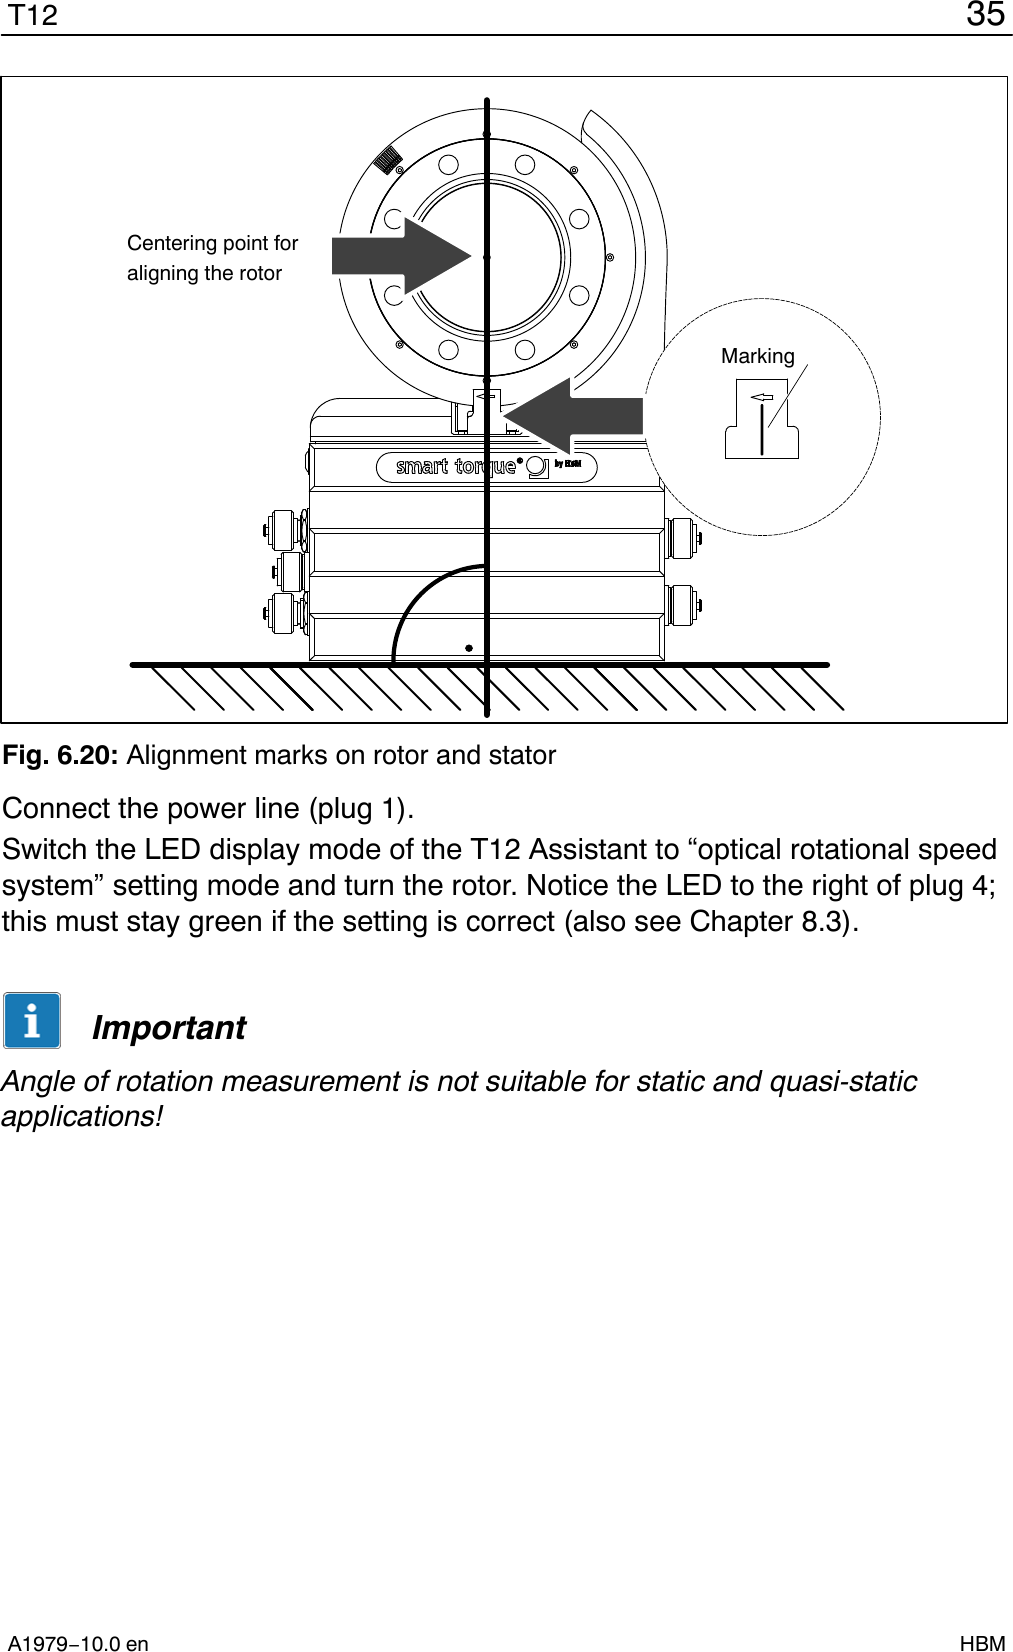 35T12A1979−10.0 en HBMCentering point foraligning the rotorMarkingFig. 6.20: Alignment marks on rotor and statorConnect the power line (plug 1).Switch the LED display mode of the T12 Assistant to “optical rotational speedsystem” setting mode and turn the rotor. Notice the LED to the right of plug 4;this must stay green if the setting is correct (also see Chapter 8.3).ImportantAngle of rotation measurement is not suitable for static and quasi-staticapplications!